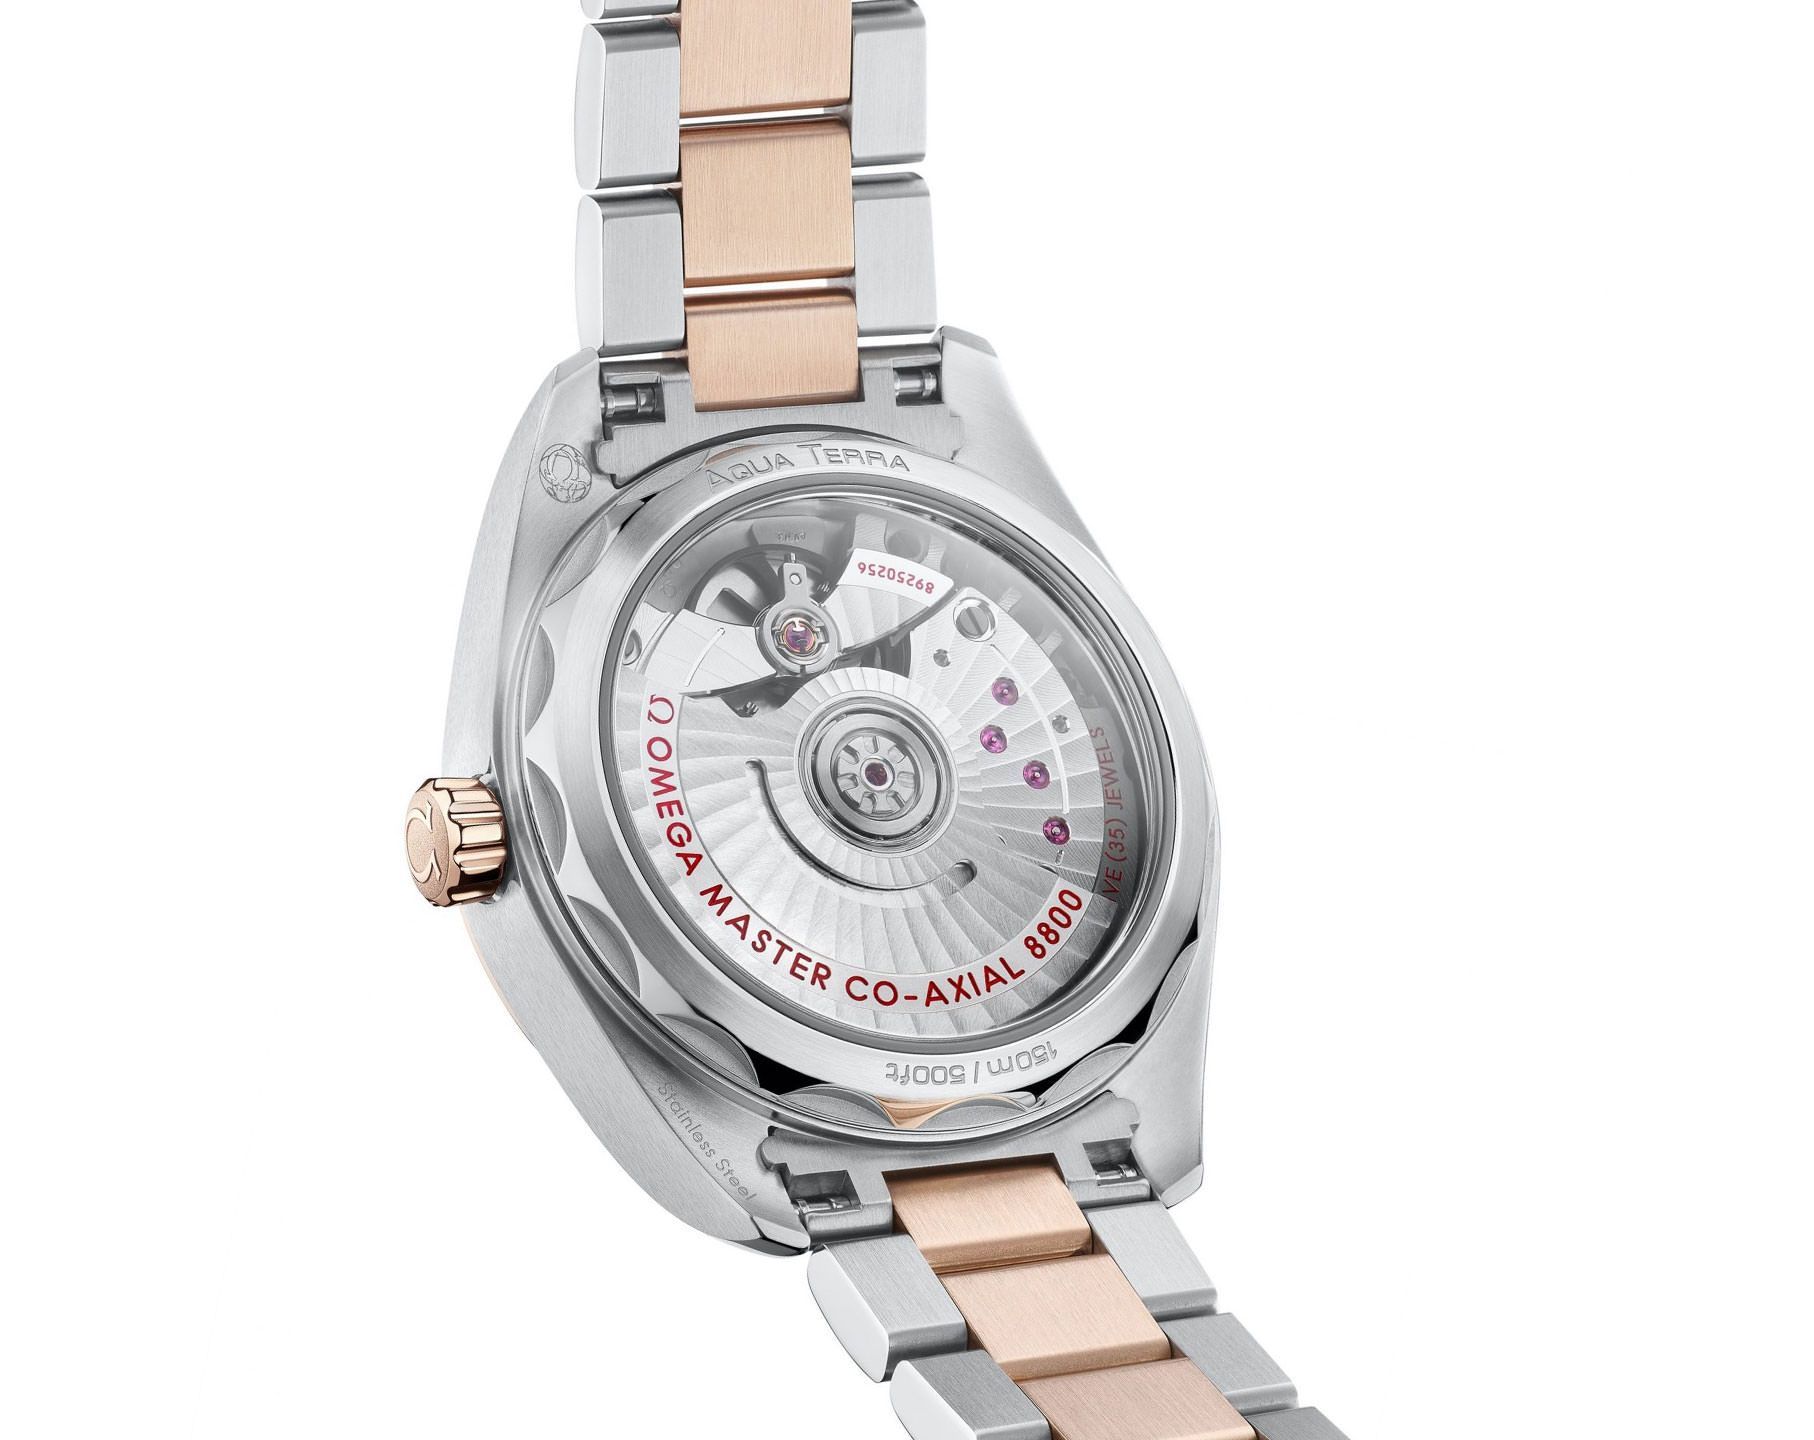 Omega Seamaster Aqua Terra Pink Dial 34 mm Automatic Watch For Women - 3